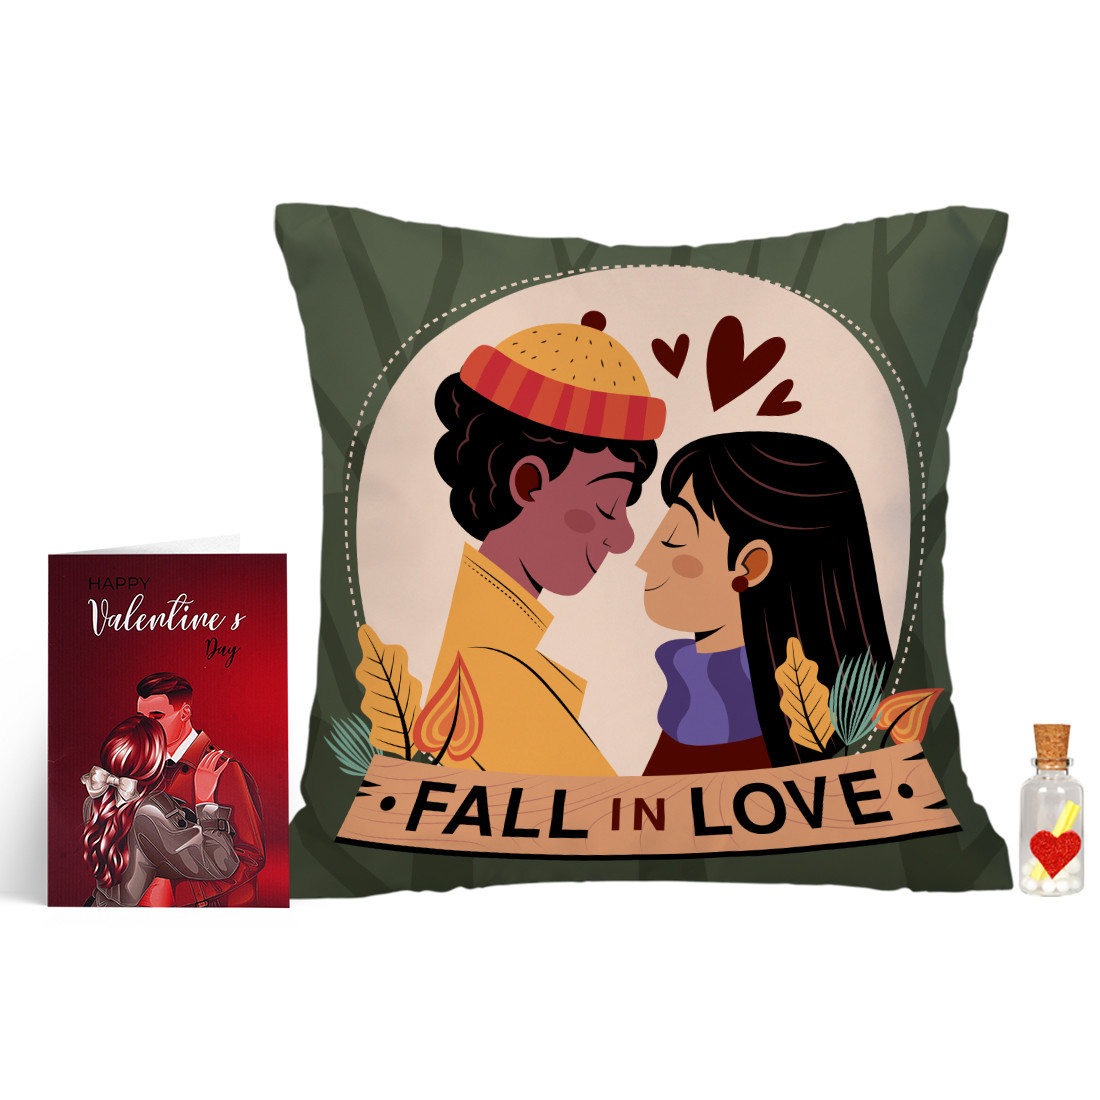 Gifts Online - Find Gifts in India, Buy Gifts | garibimeaatagila.com